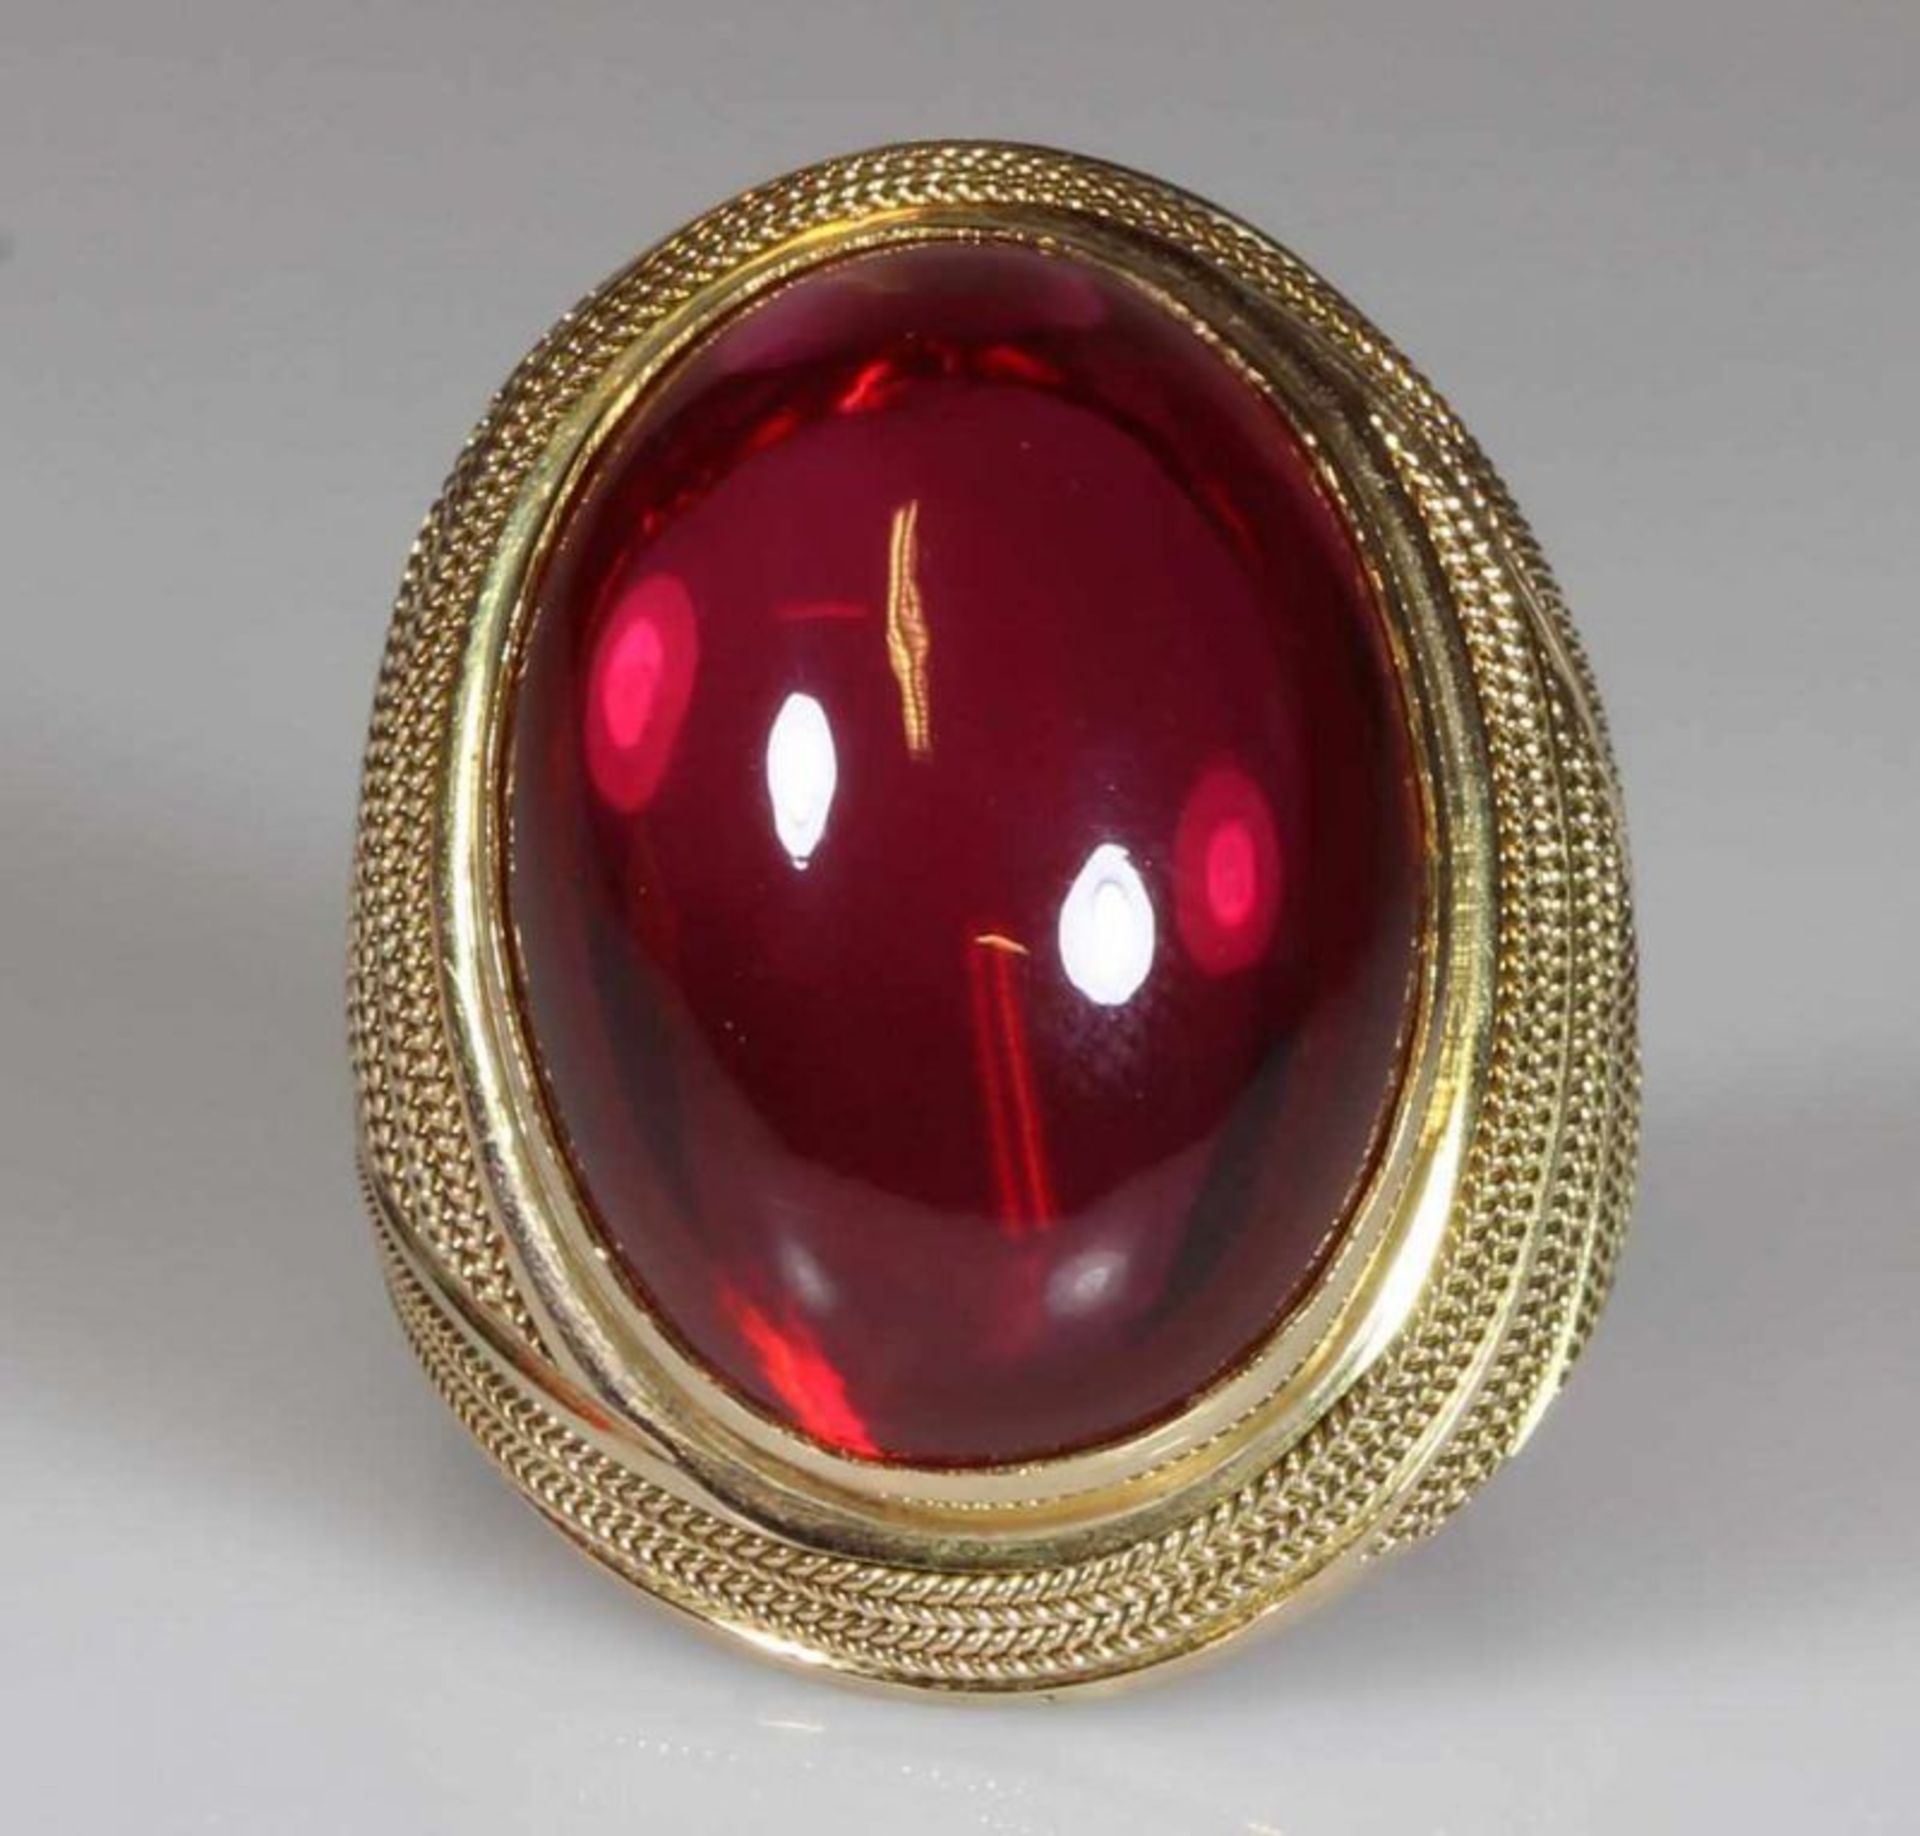 Ring, GG 585, 1 großer ovaler roter Spinell-Cabochon, 21 g, RM 21.5 25.00 % buyer's premium on the